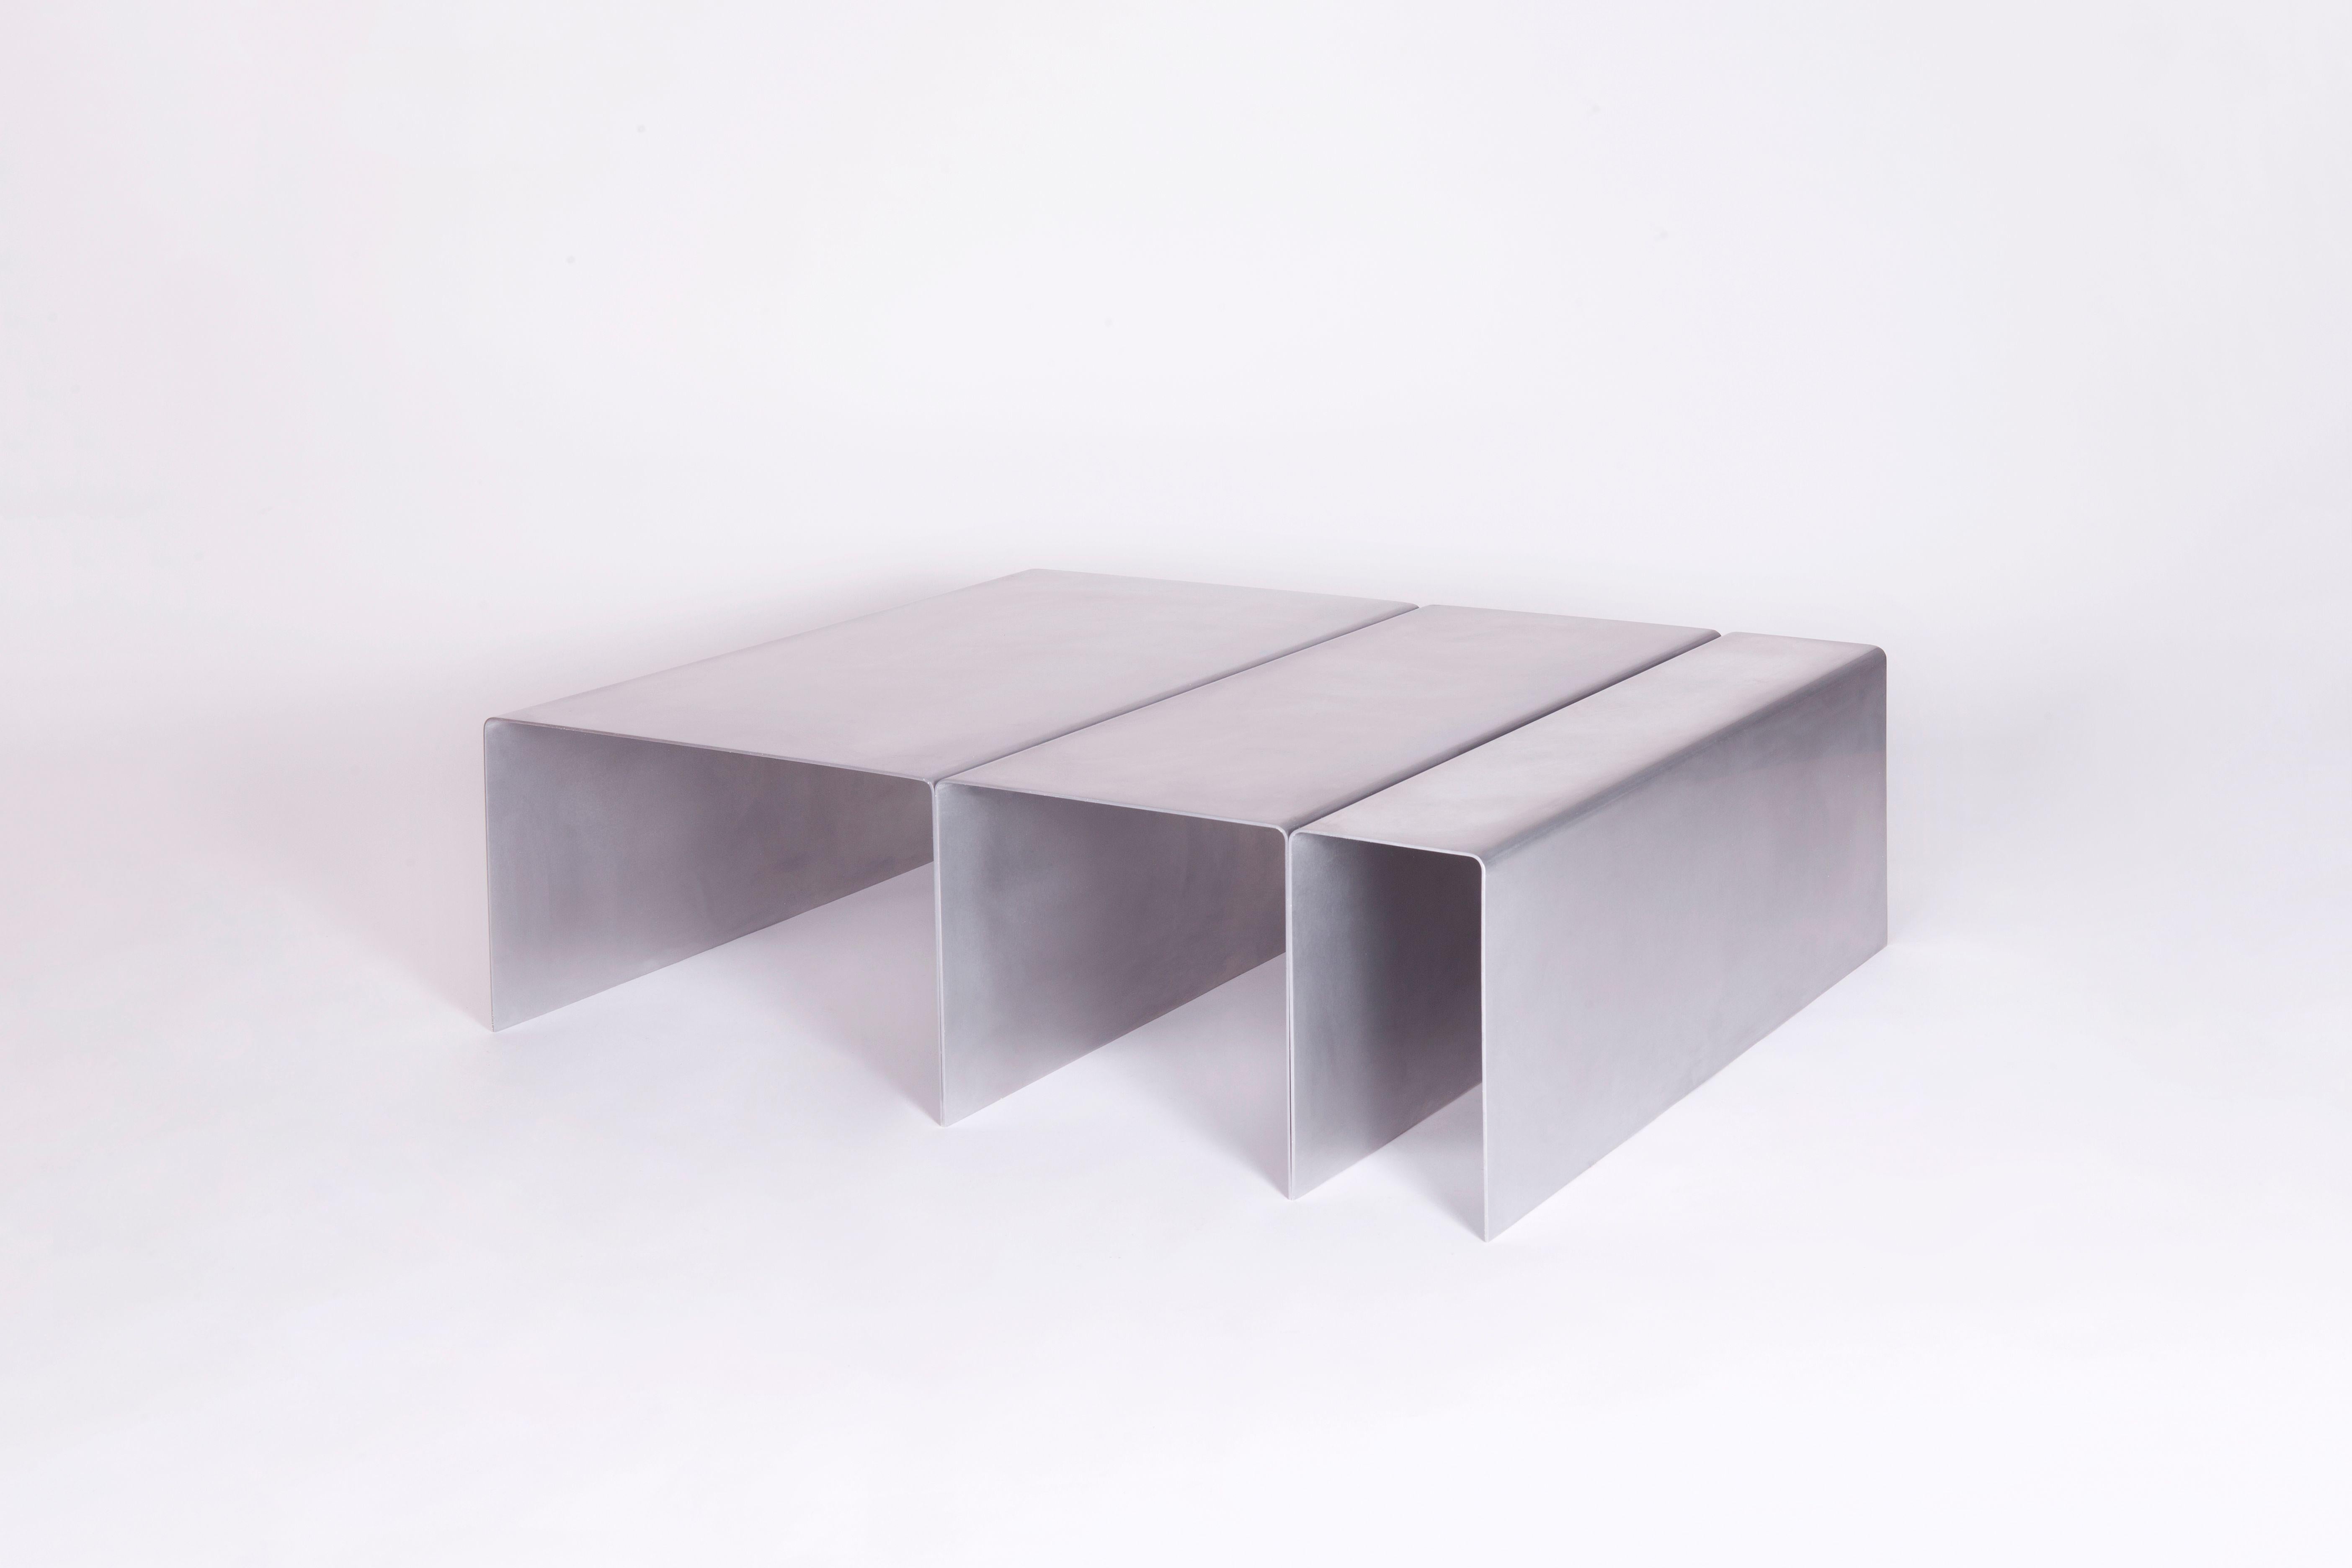 Segment table by Estudio Persona
Dimensions: W 78.8 x L 107 x H 30.5 cm
Materials: Polished aluminum

Coffee table in solid metal.
Available in burnished brass, aluminum and blackened steel.
Customizations available.


Estudio Persona was